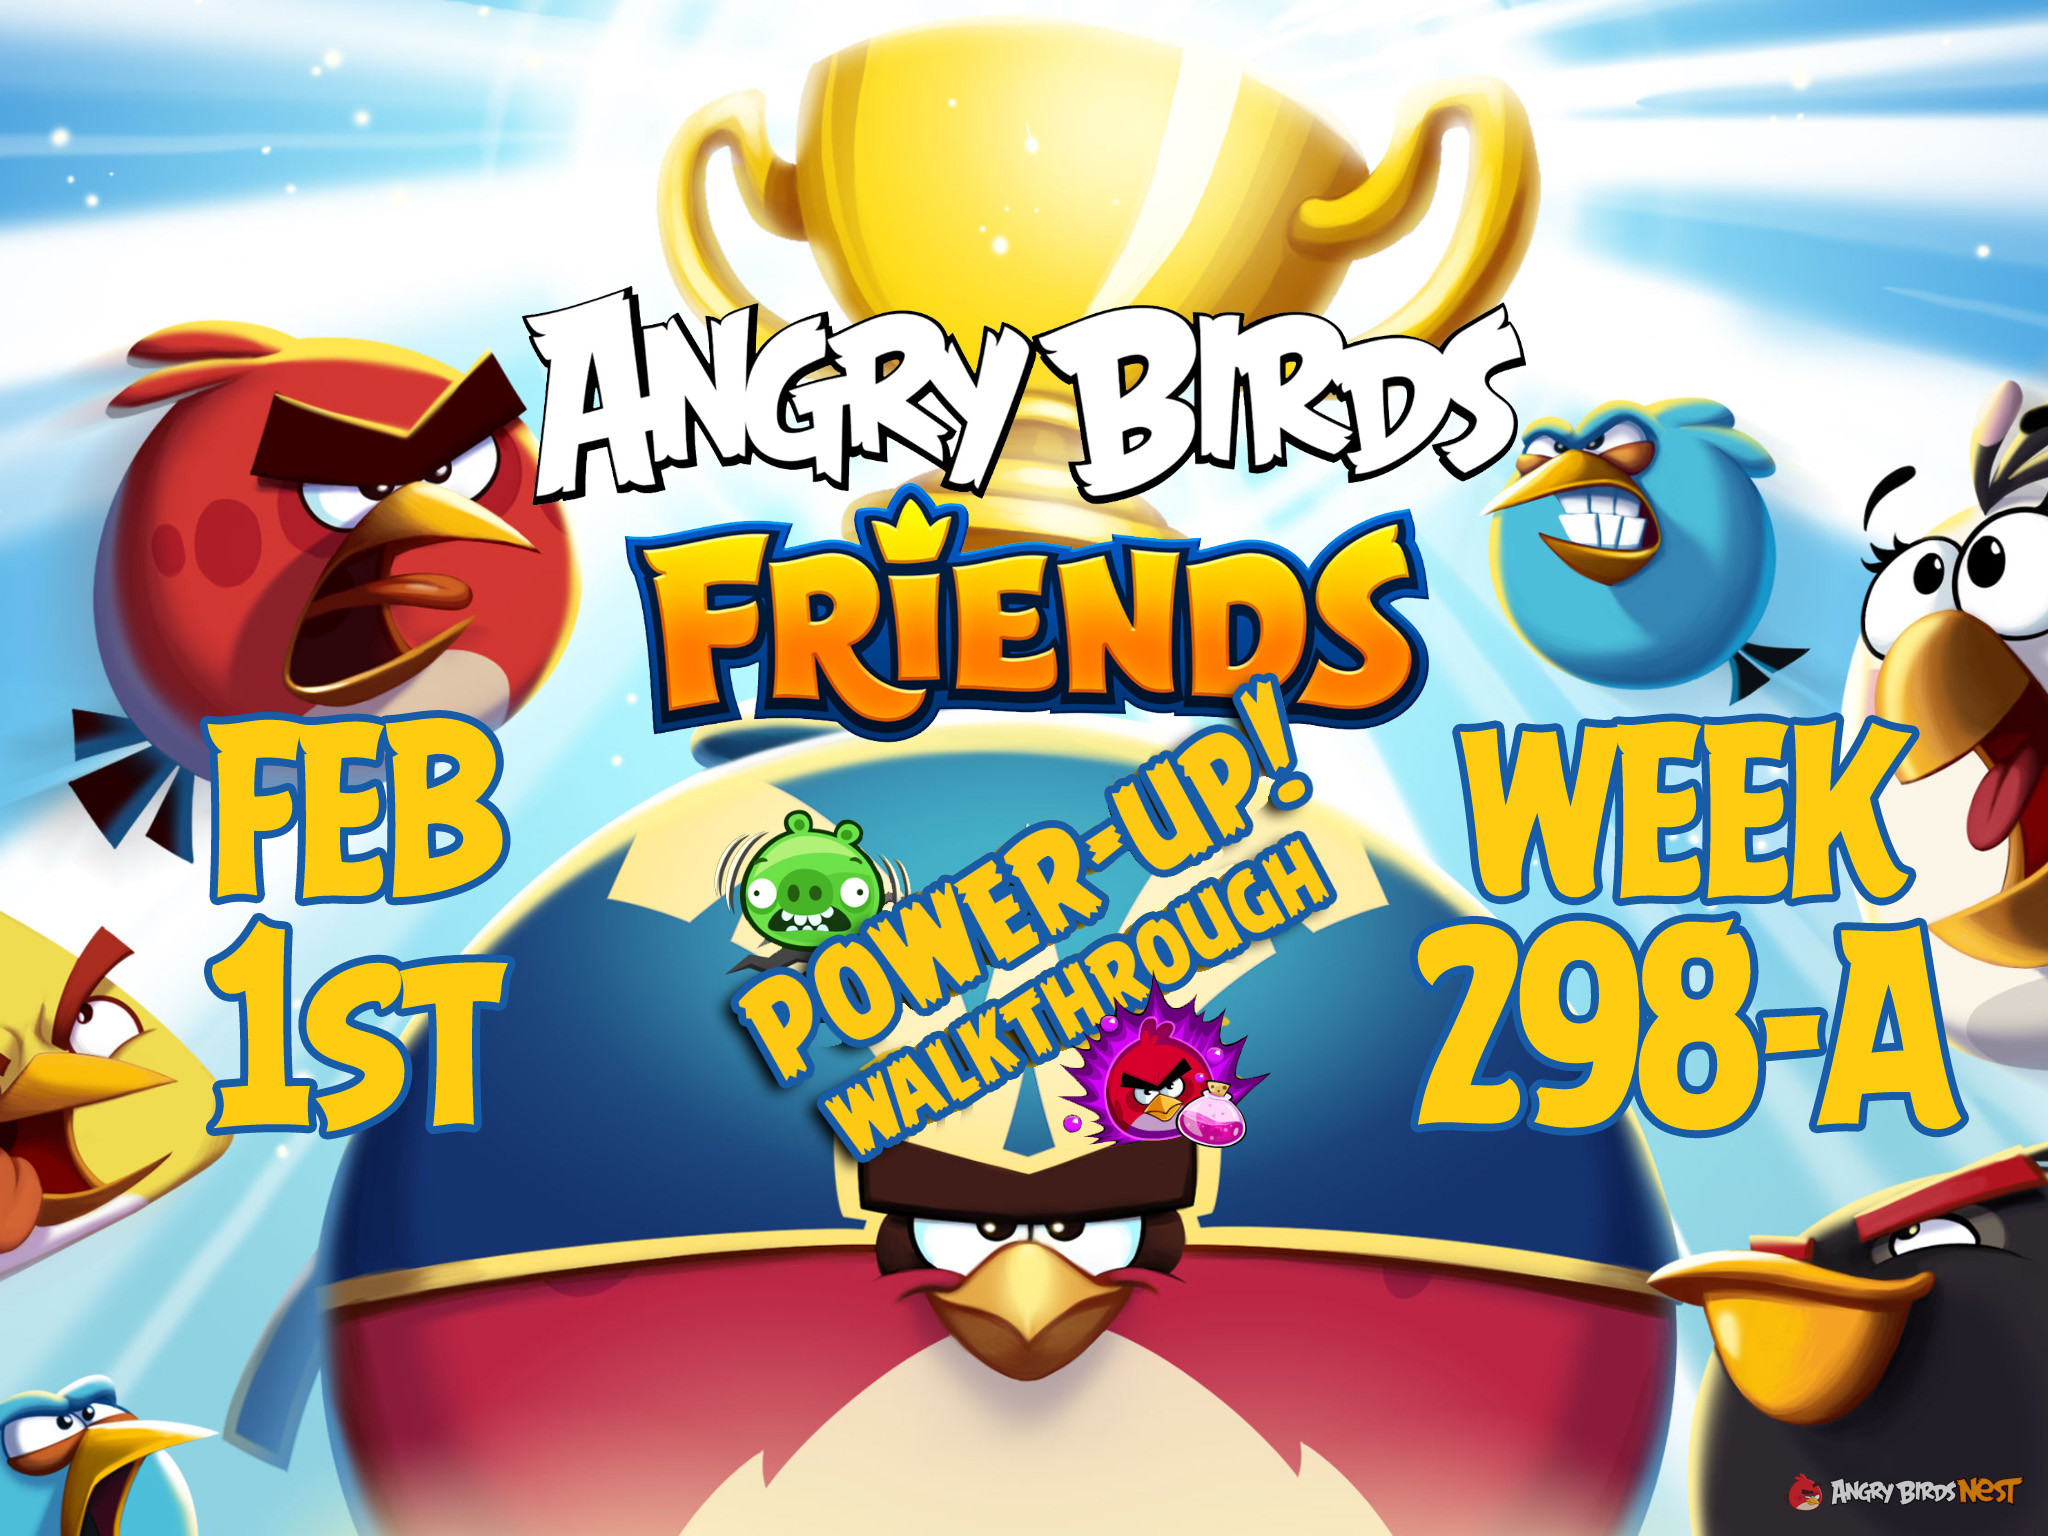 Angry Birds Friends Tournament Week 298-A Feature Image PU